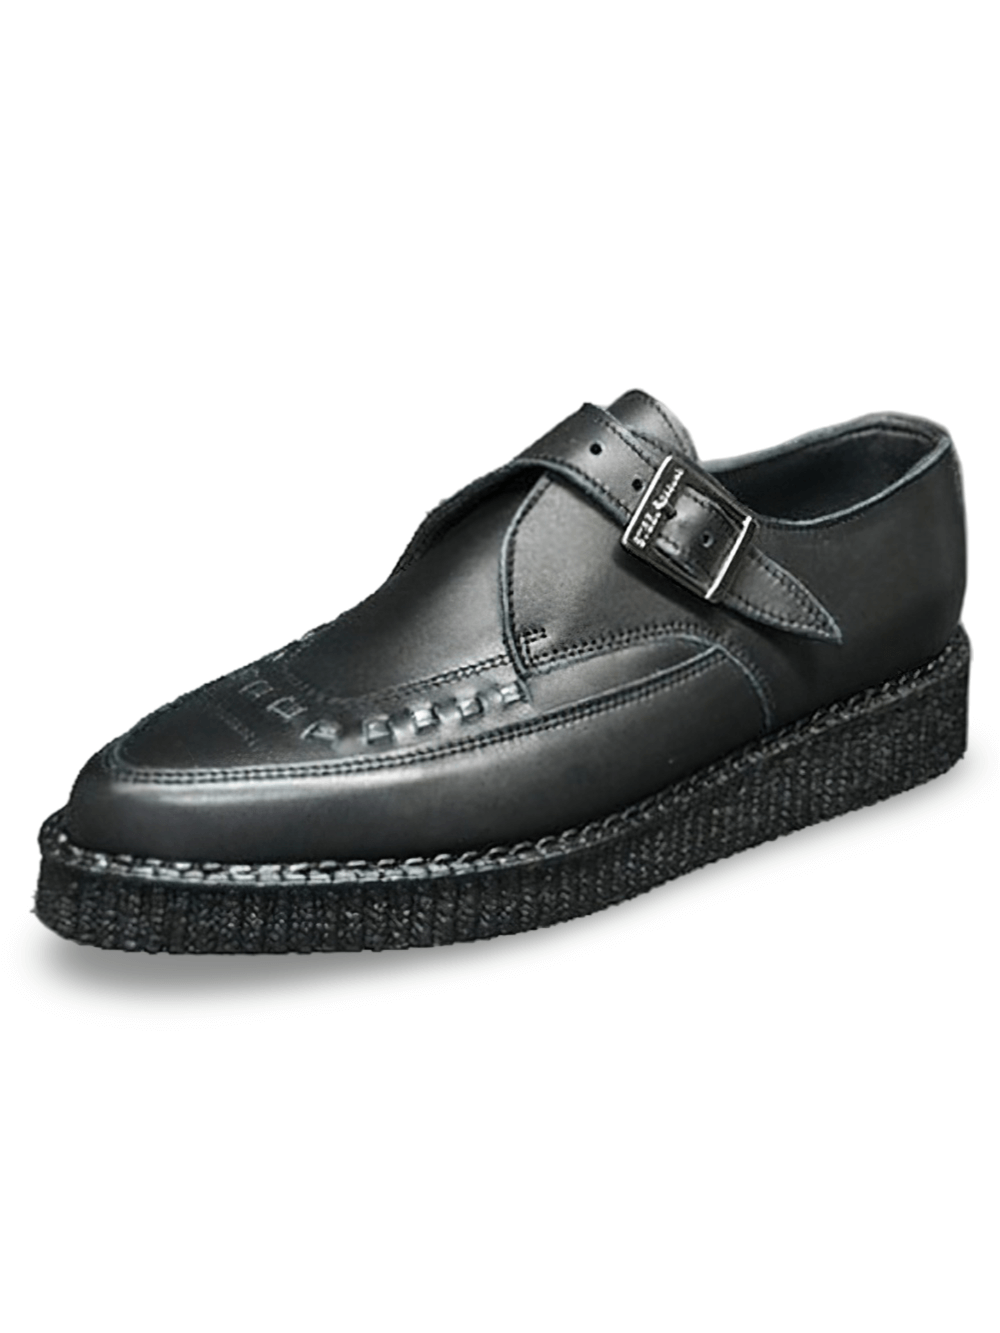 Stylish Black Pointed Creeper Shoes with Buckle